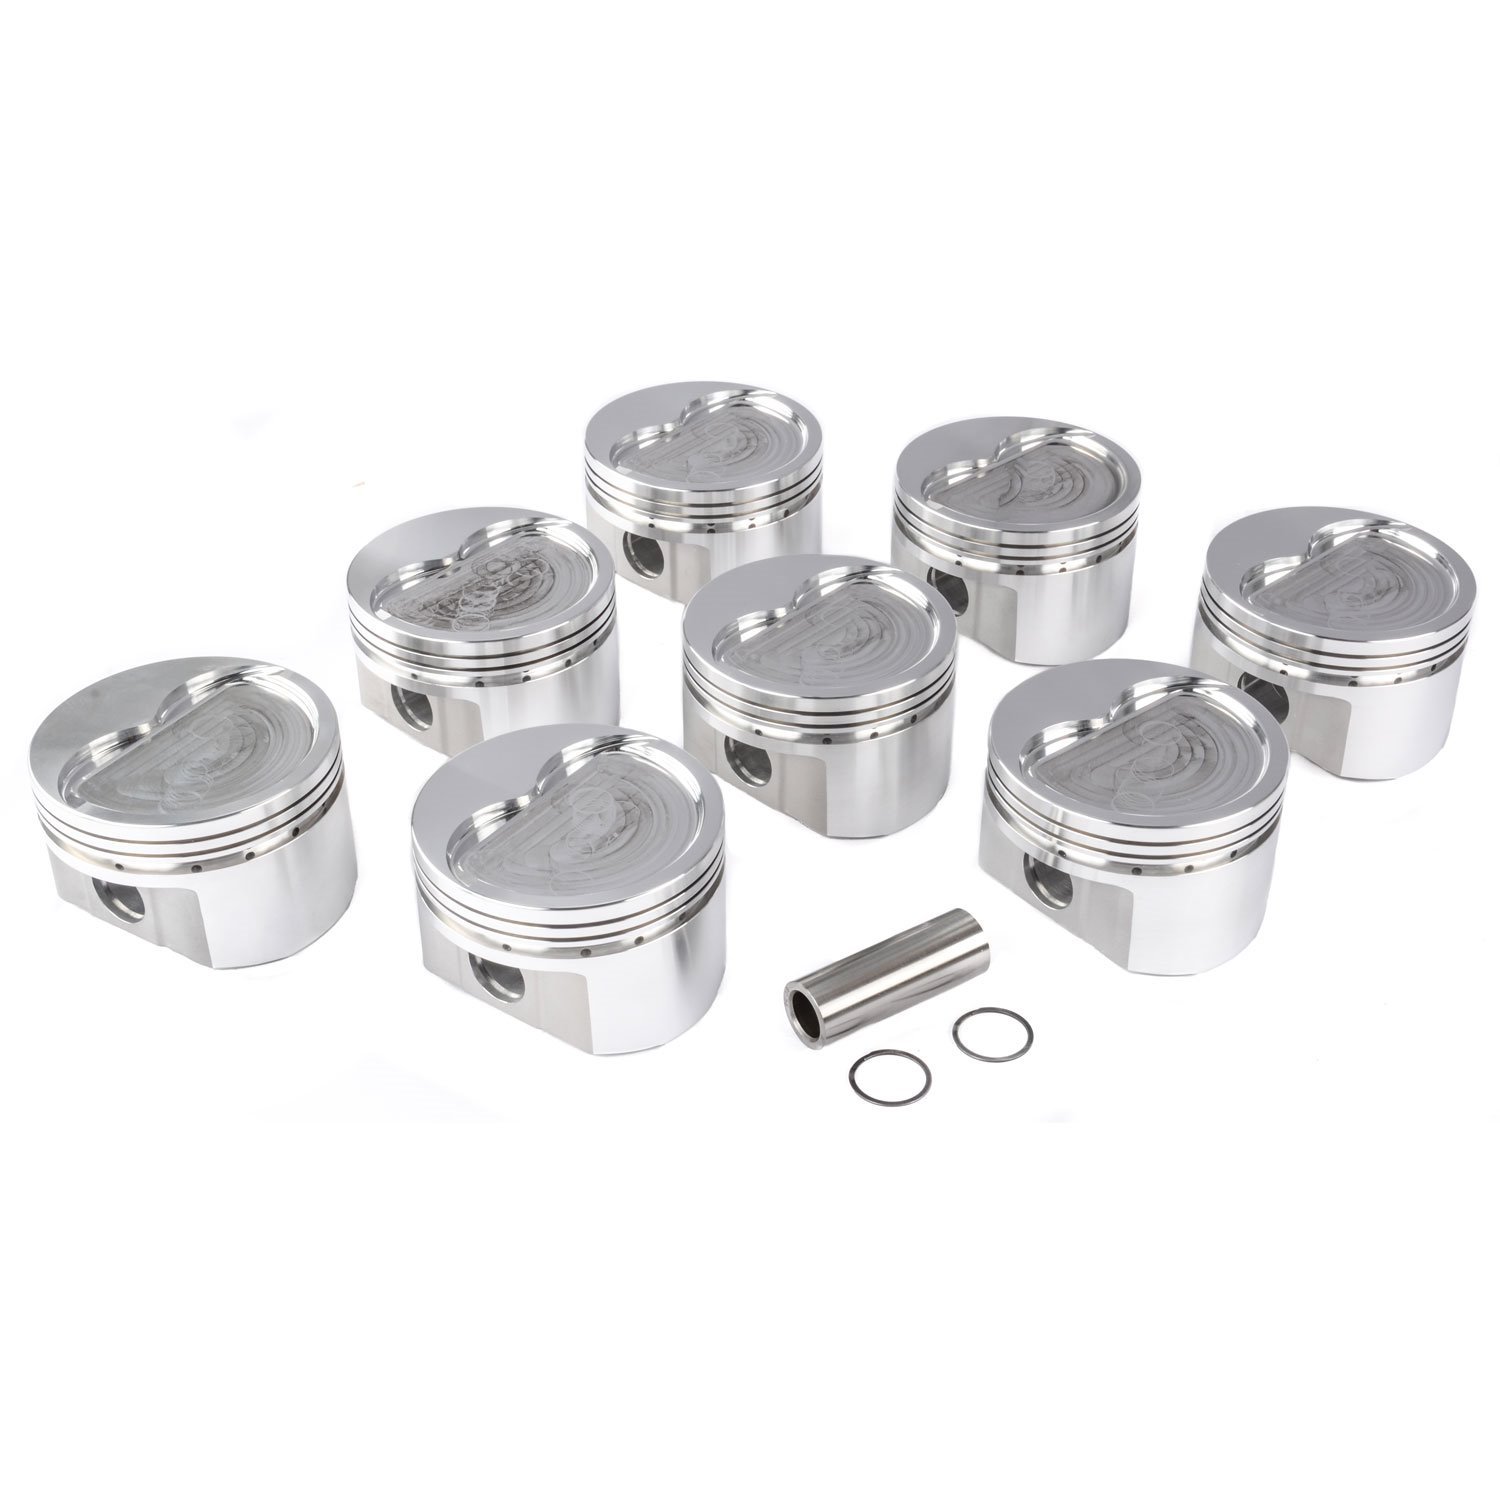 Inverted Dome Forged Pistons Bore: 4.155"